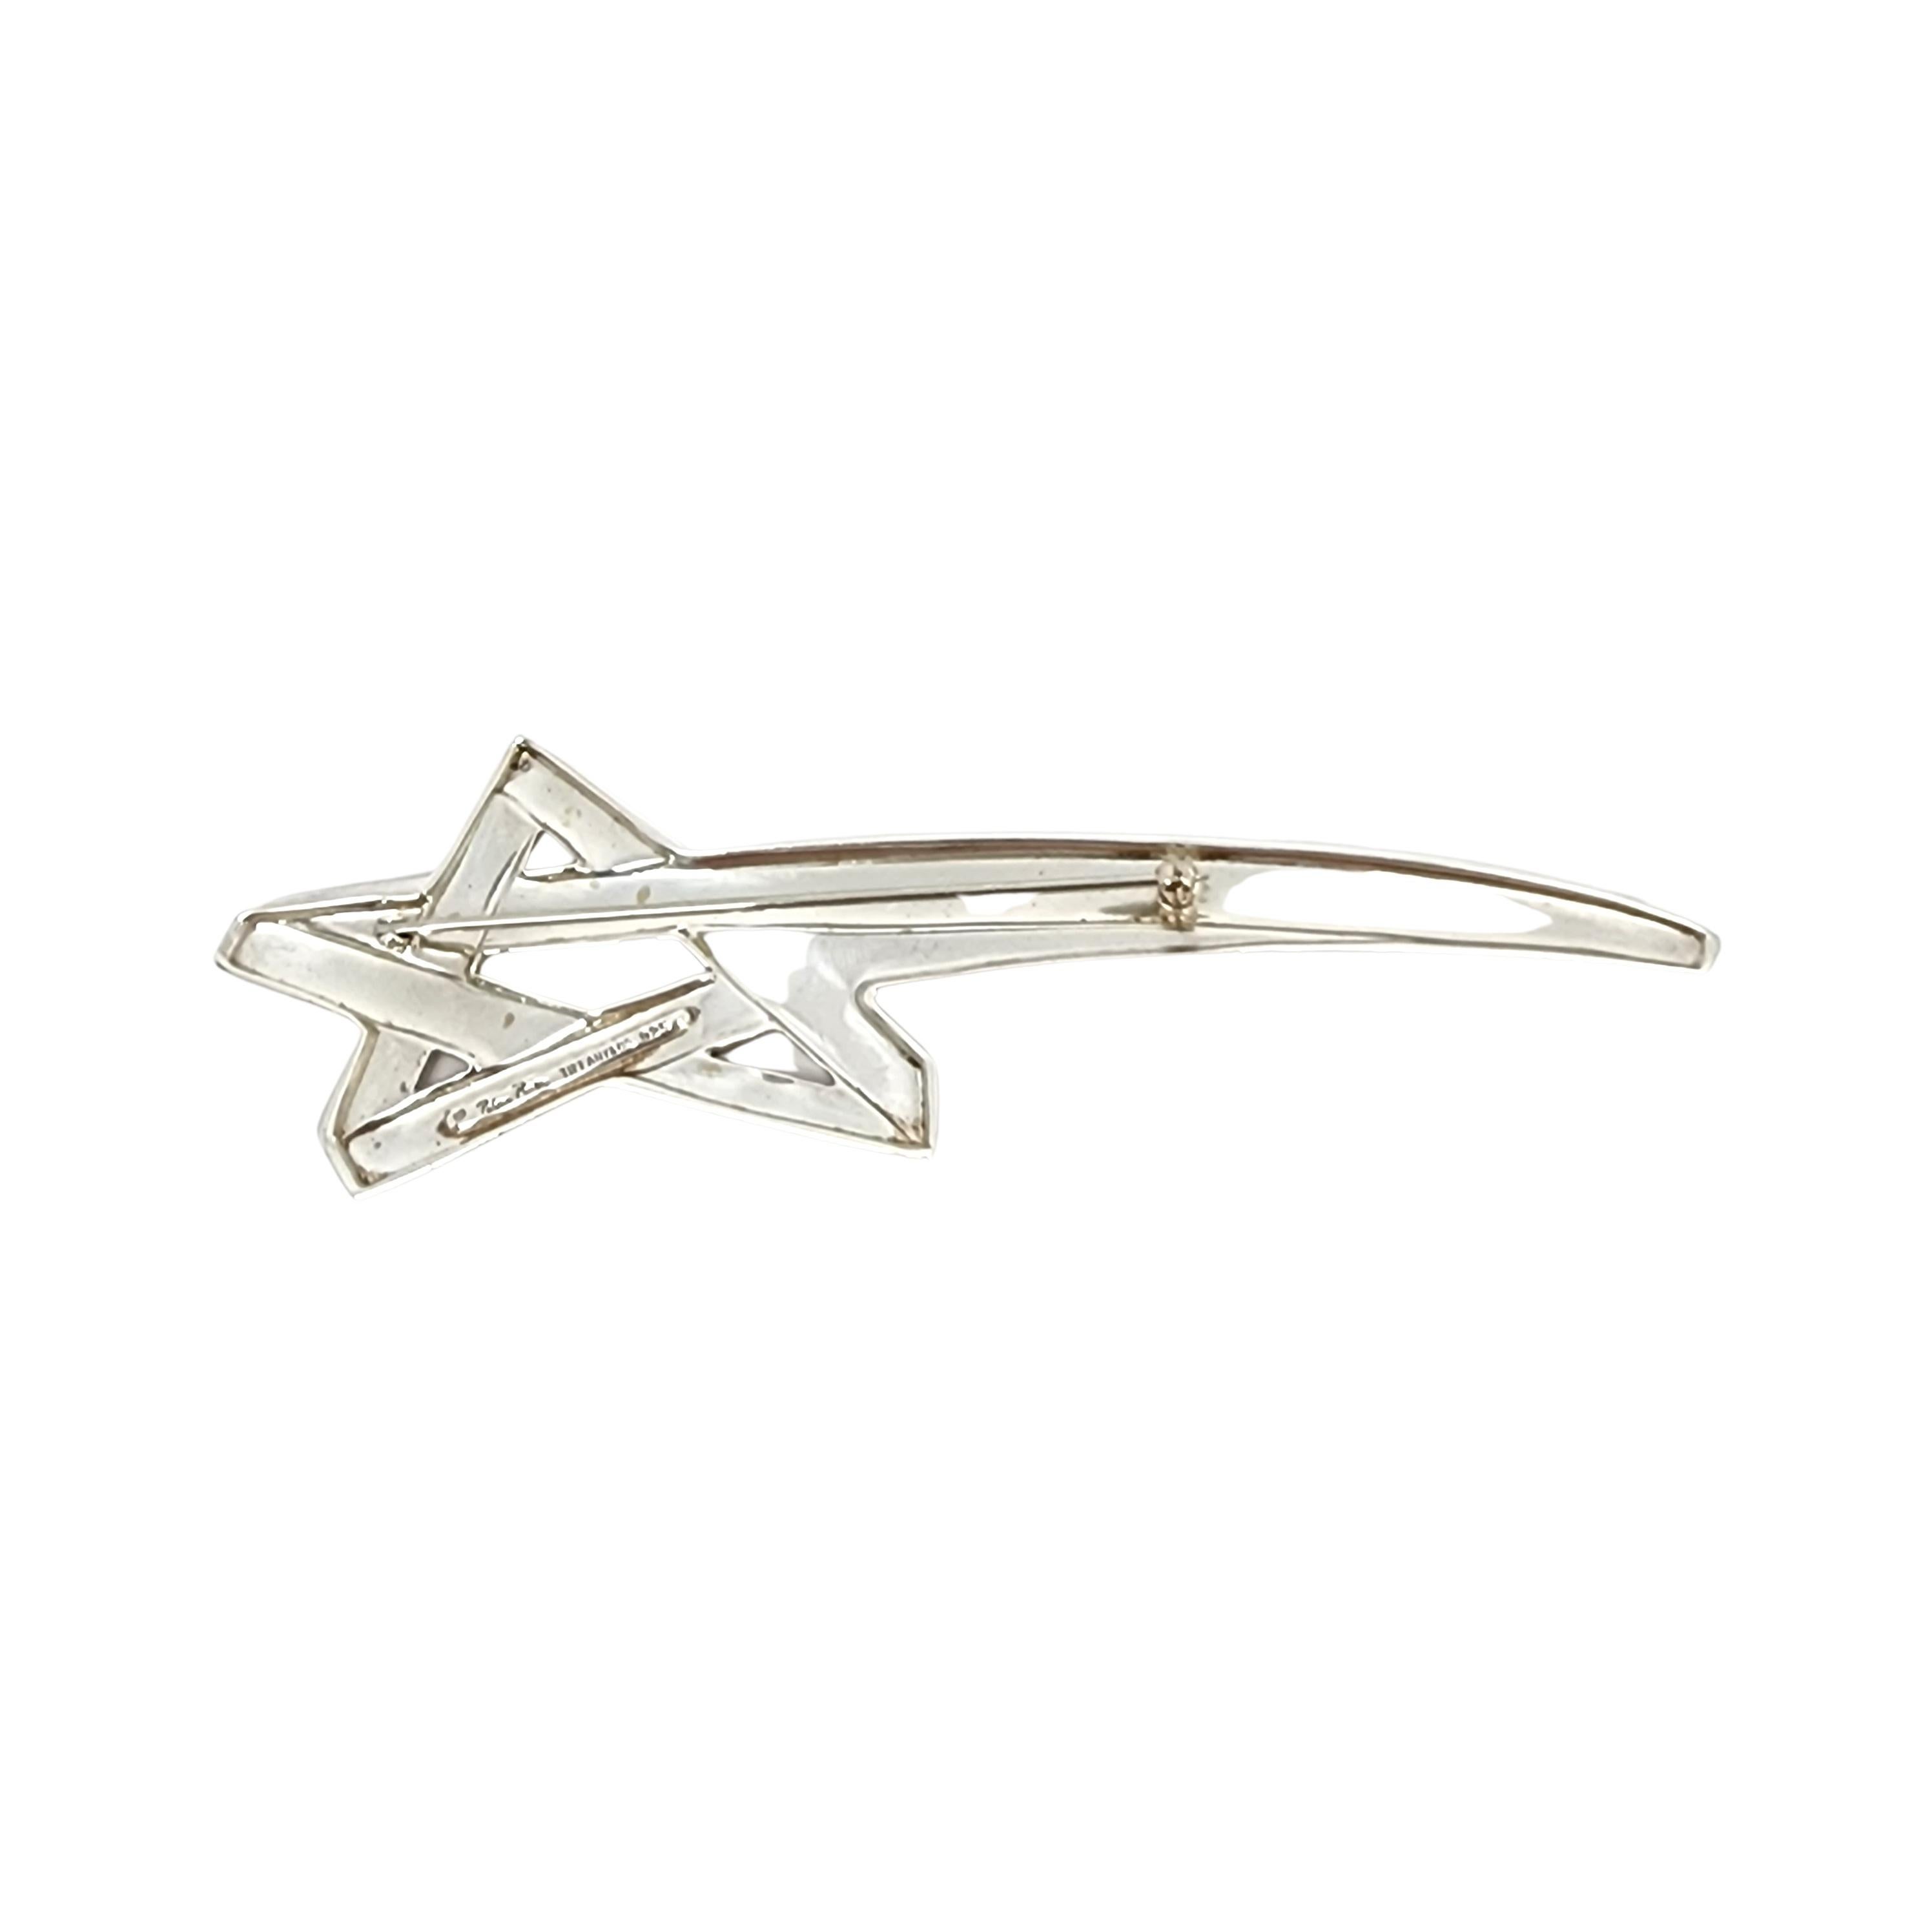 Paloma Picasso sterling silver shooting star pin for Tiffany & Co.

Paloma Picasso's shooting star design in the extra large size. Does not include Tiffany & Co box or pouch.

Measures approx 4 1/2